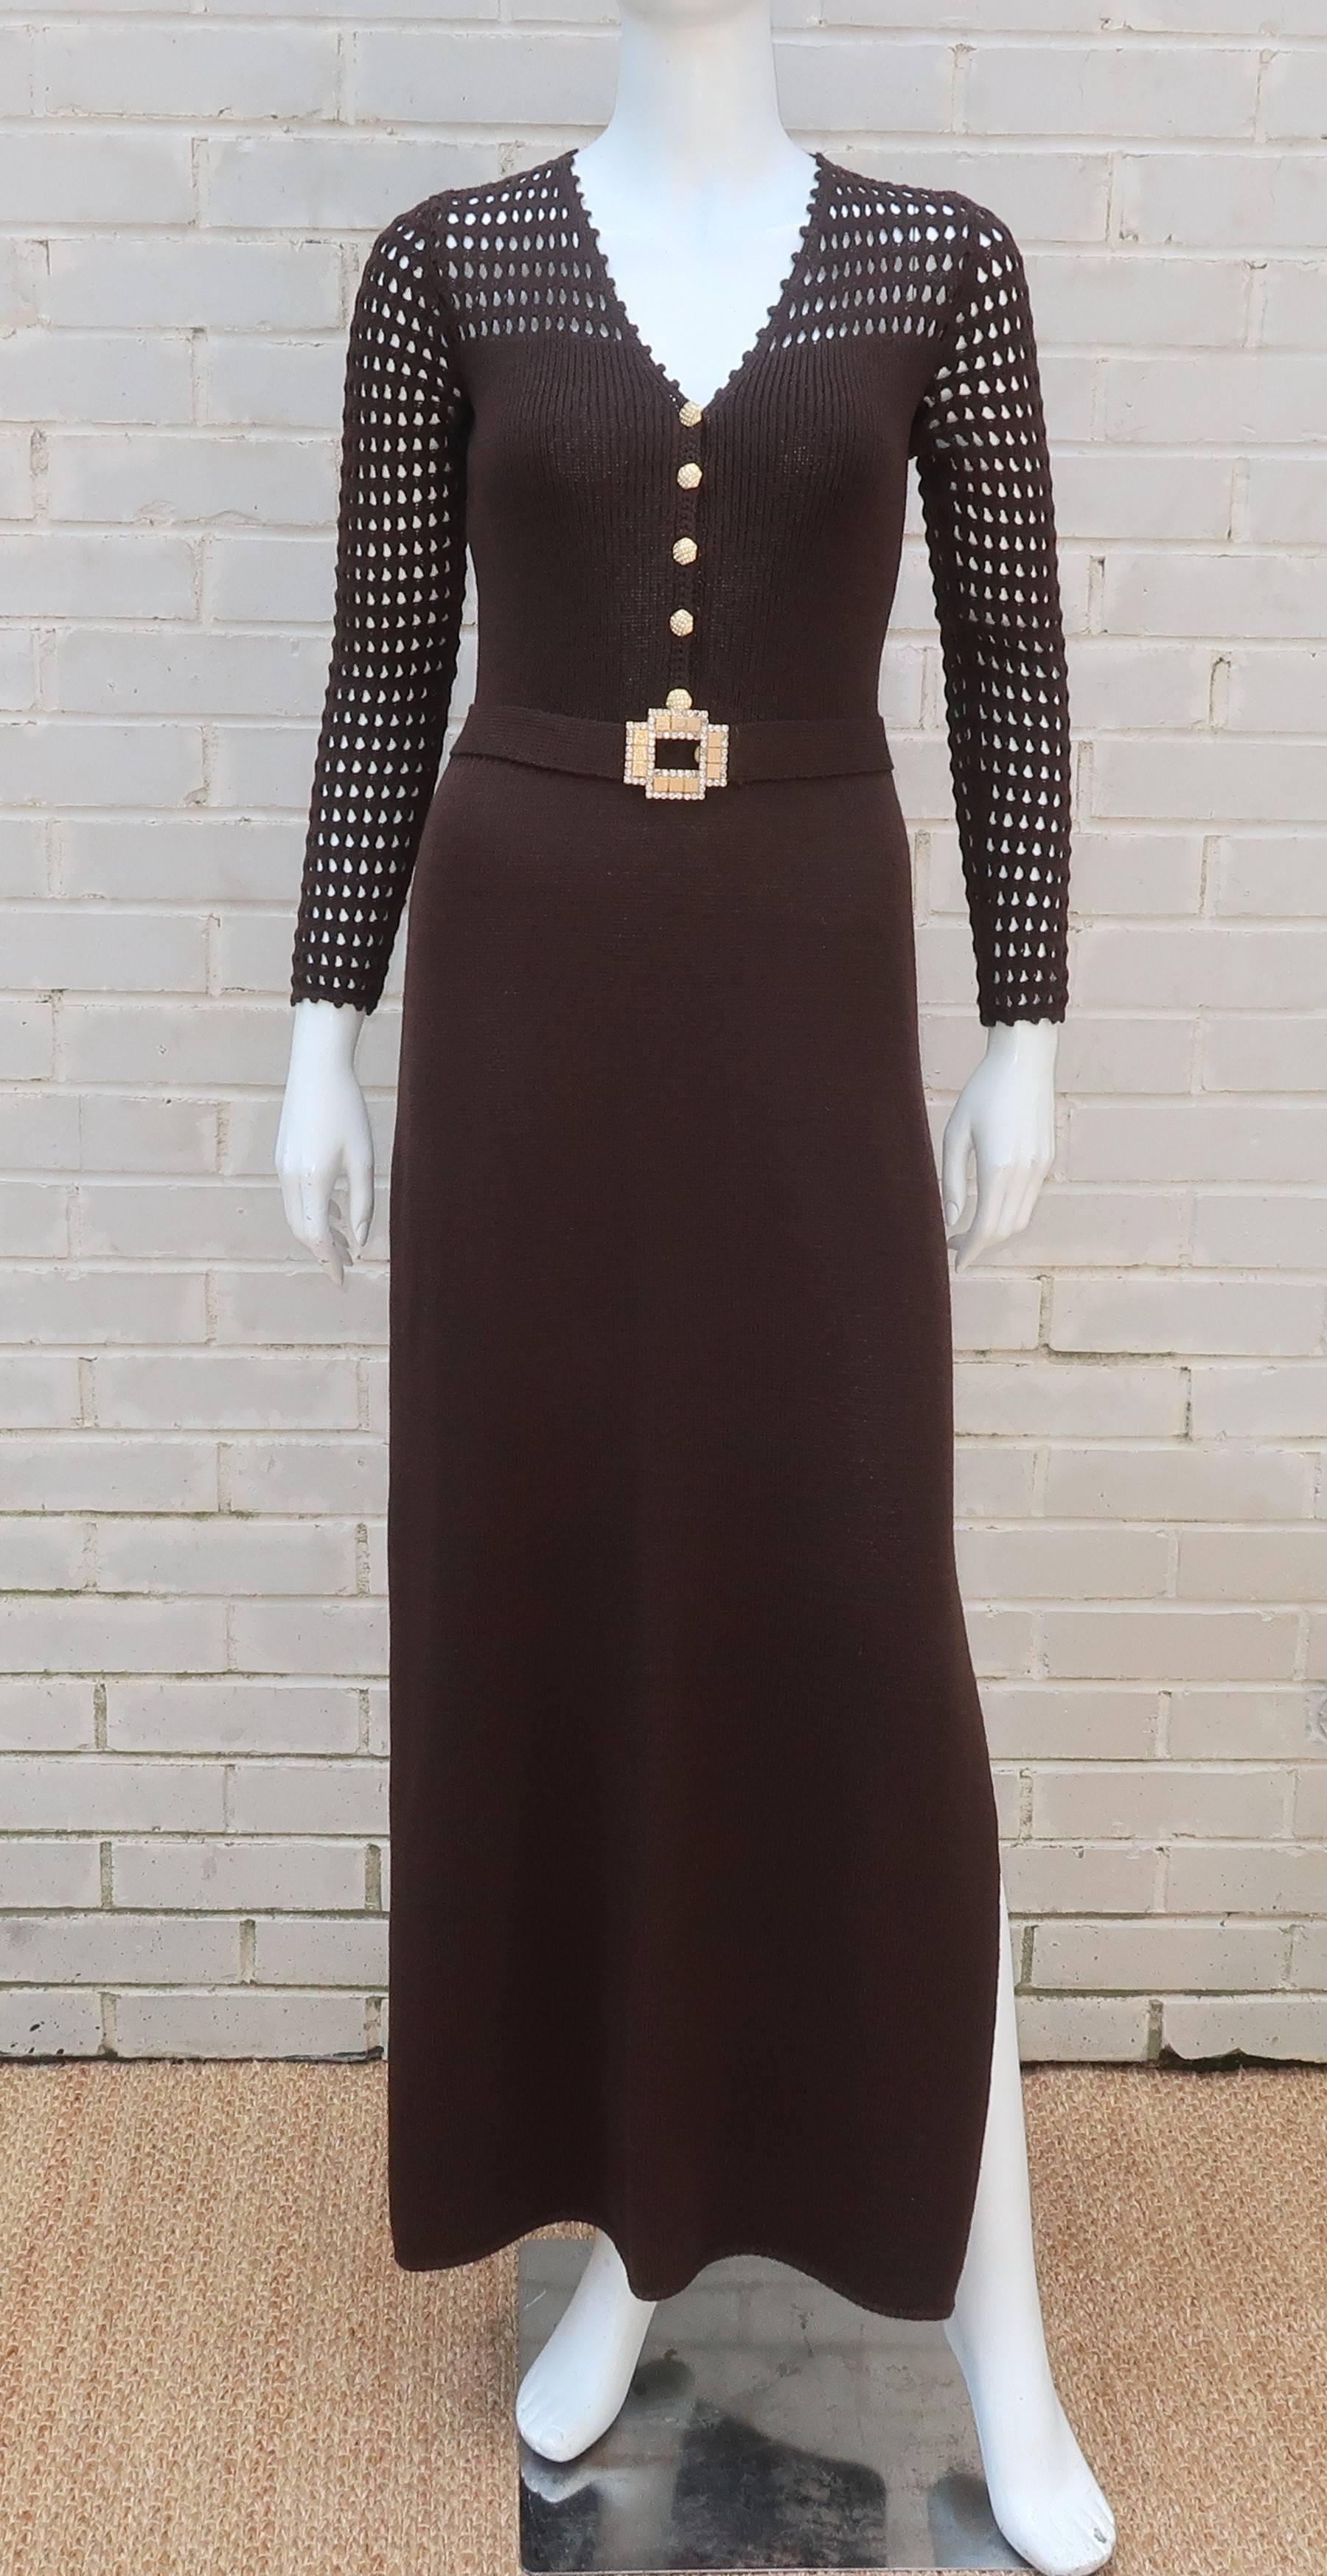 Historially, St. John Knits brand has appealed to ladies with a classic sensibility and rather traditional tastes ... this jazzy 1970's dark brown evening dress is an early departure!  The crochet style shoulder and sleeves provide a slinky bohemian